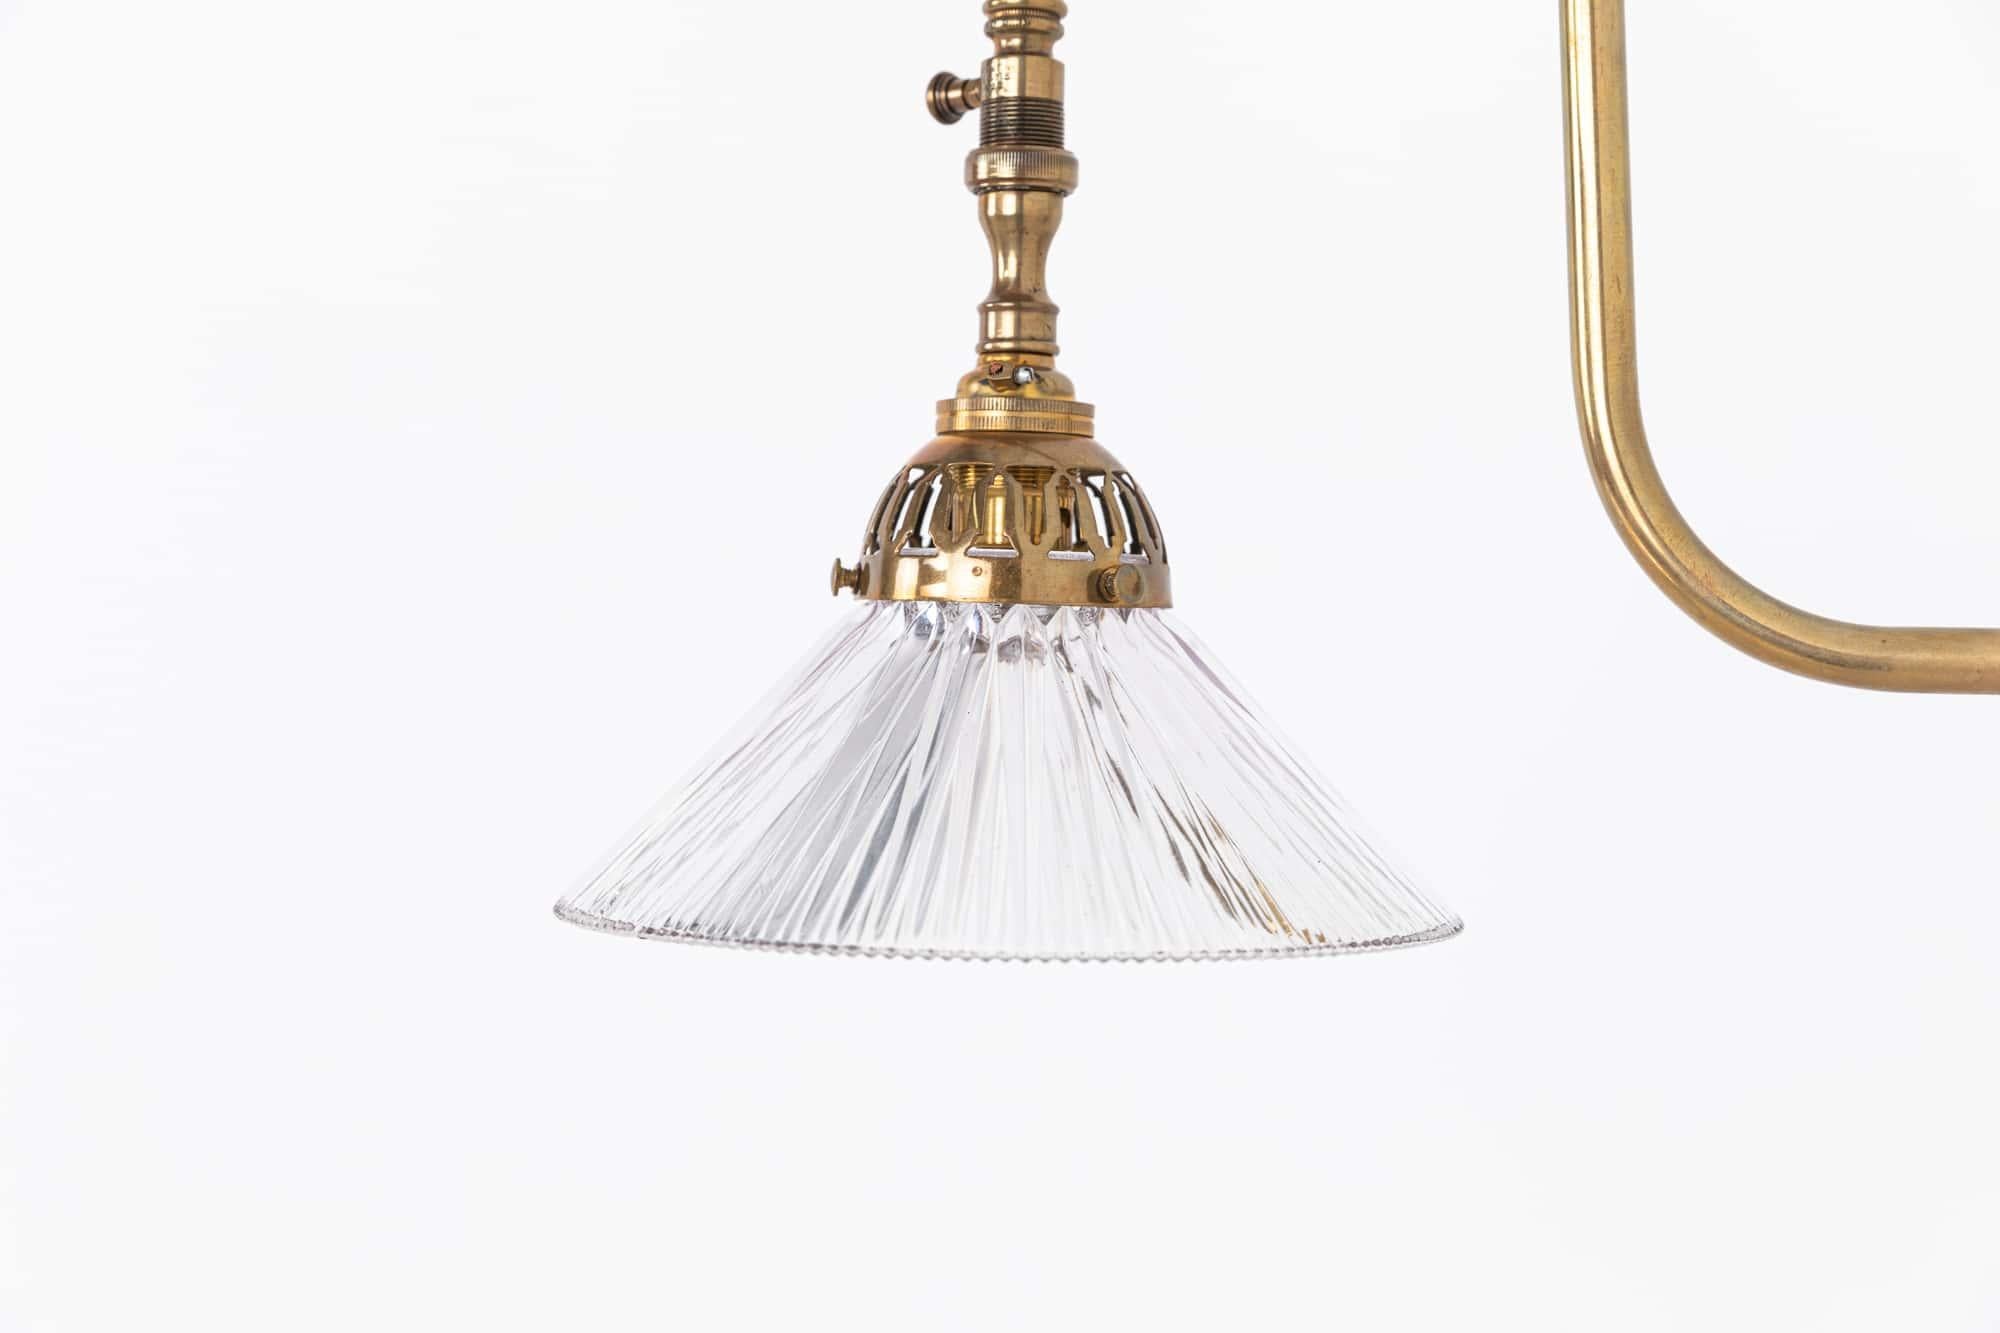 English Antique Holophane Prismatic Glass and Brass Swan Neck Wall Lamp, c.1920